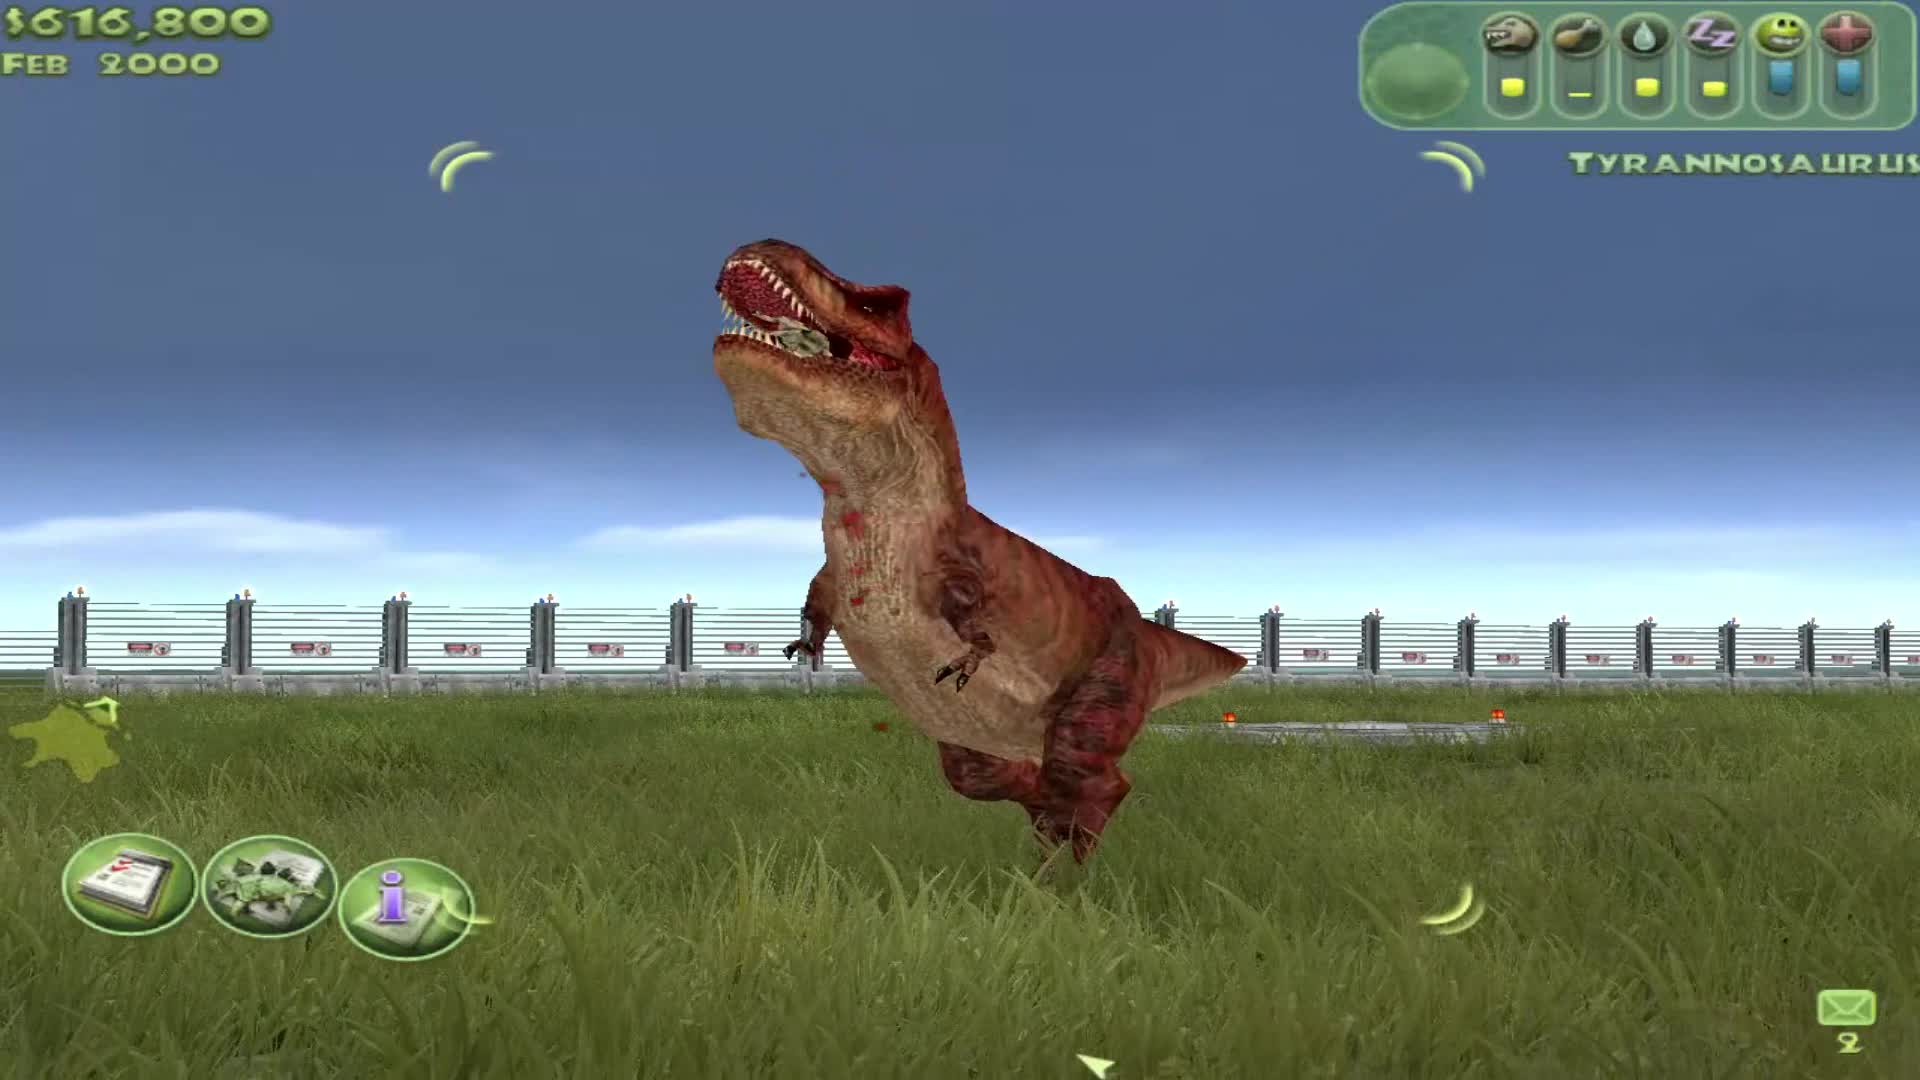 Extension Play T-Rex Dinosaur Game Online - Add-ons Opera